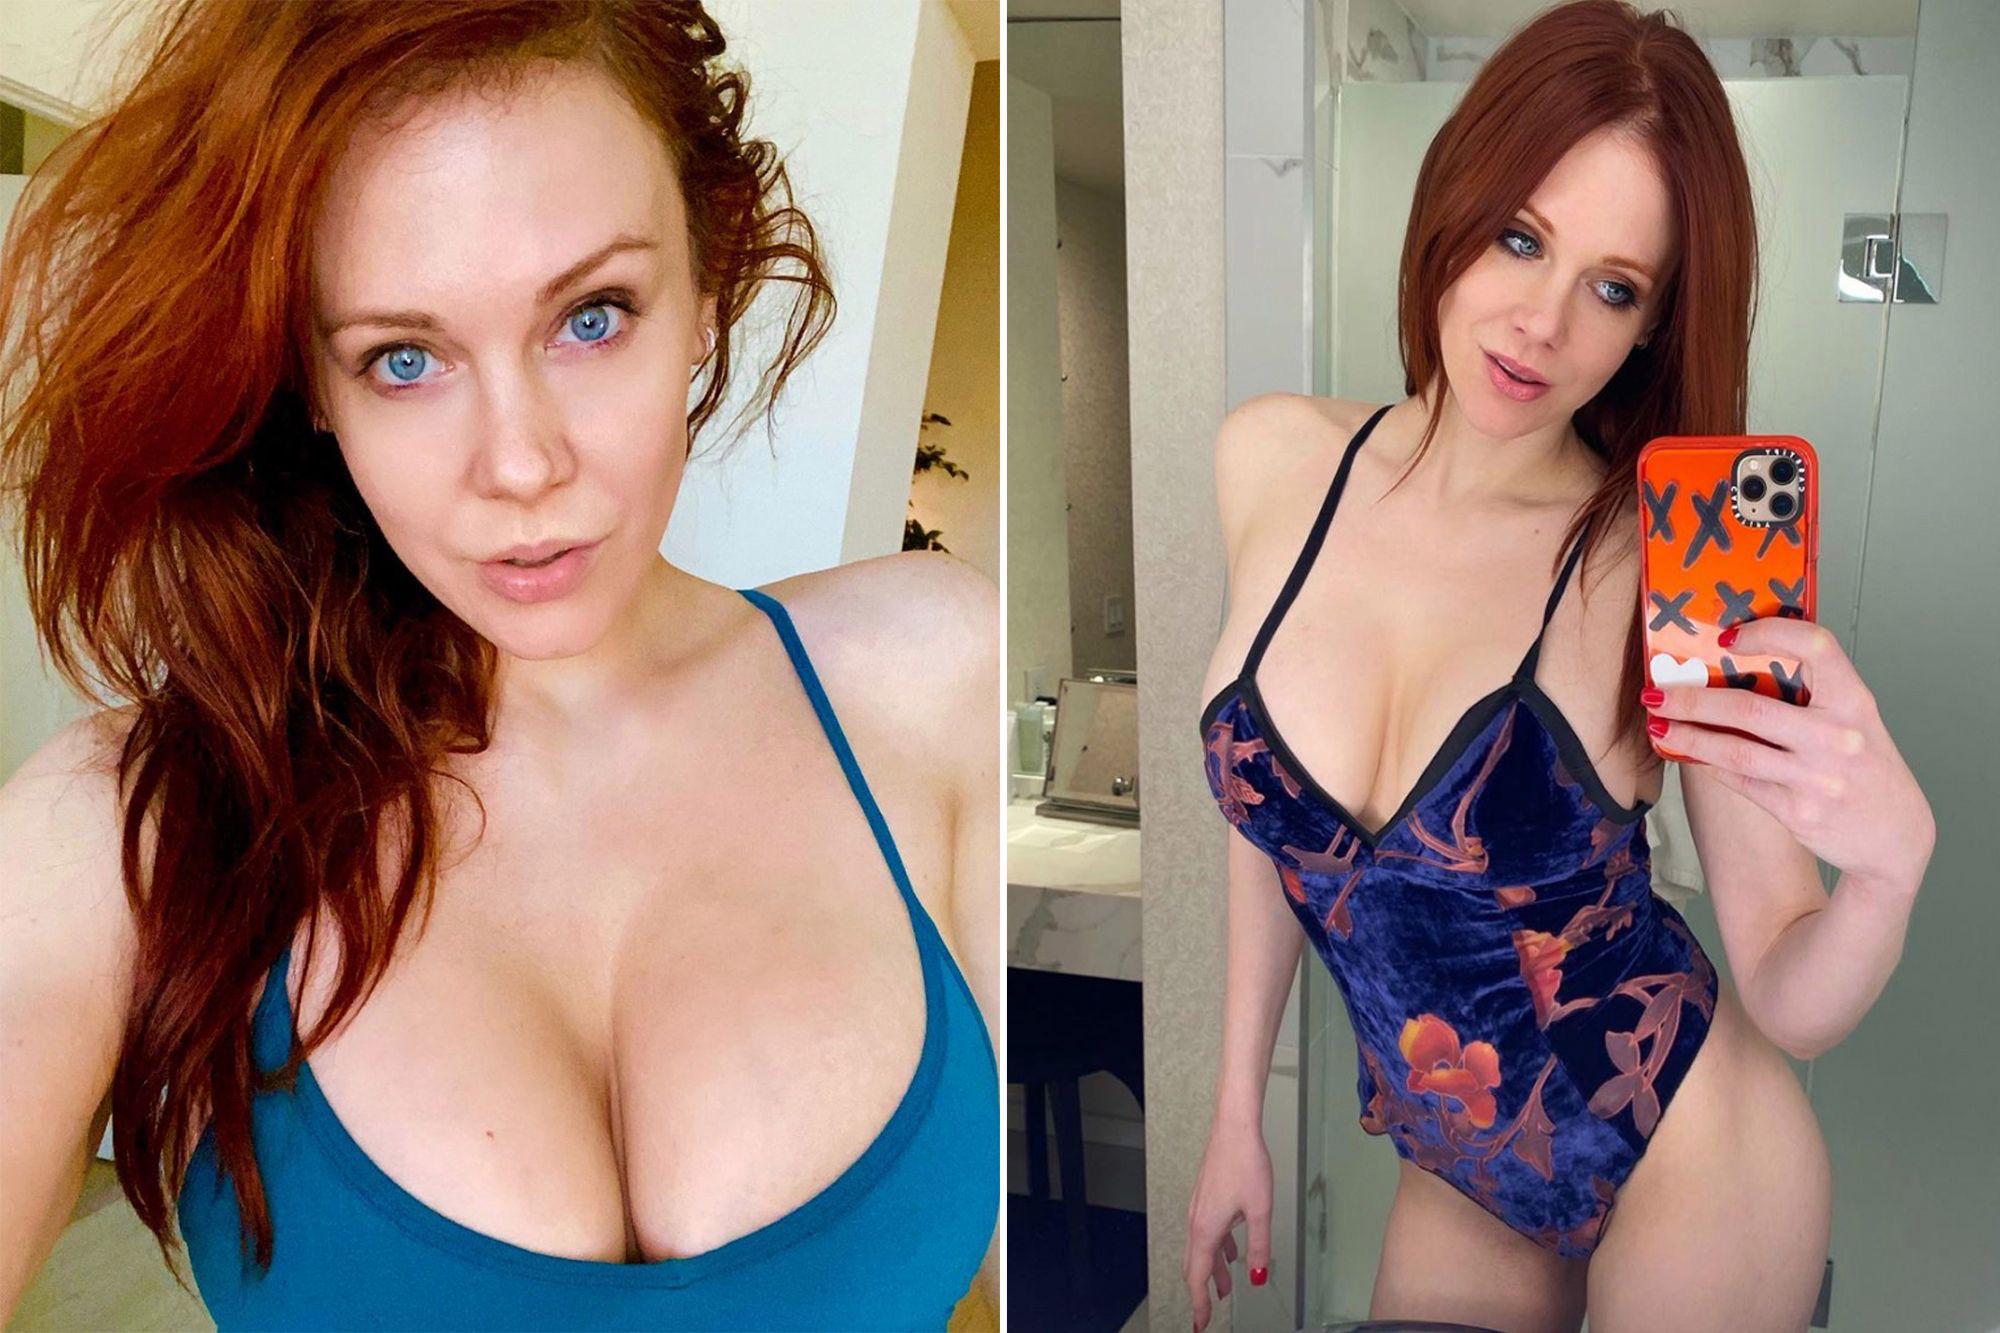 I’ve been thinking about Maitland Ward a lot lately ...